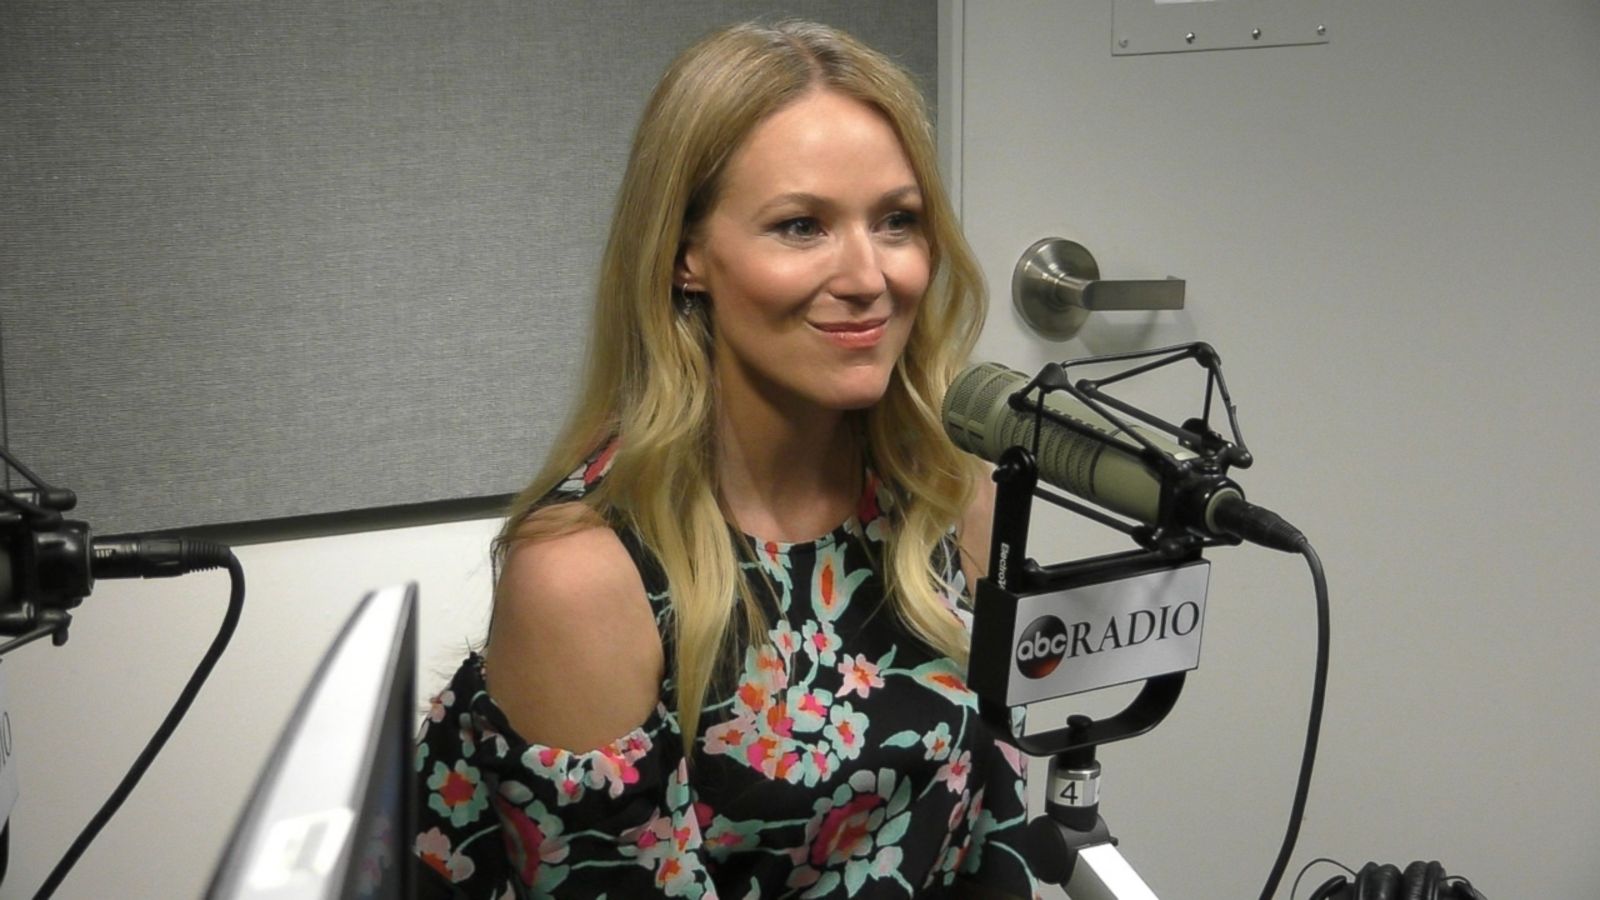 Singer-songwriter Jewel used self-taught meditation to help cope with rough childhood and anxiety